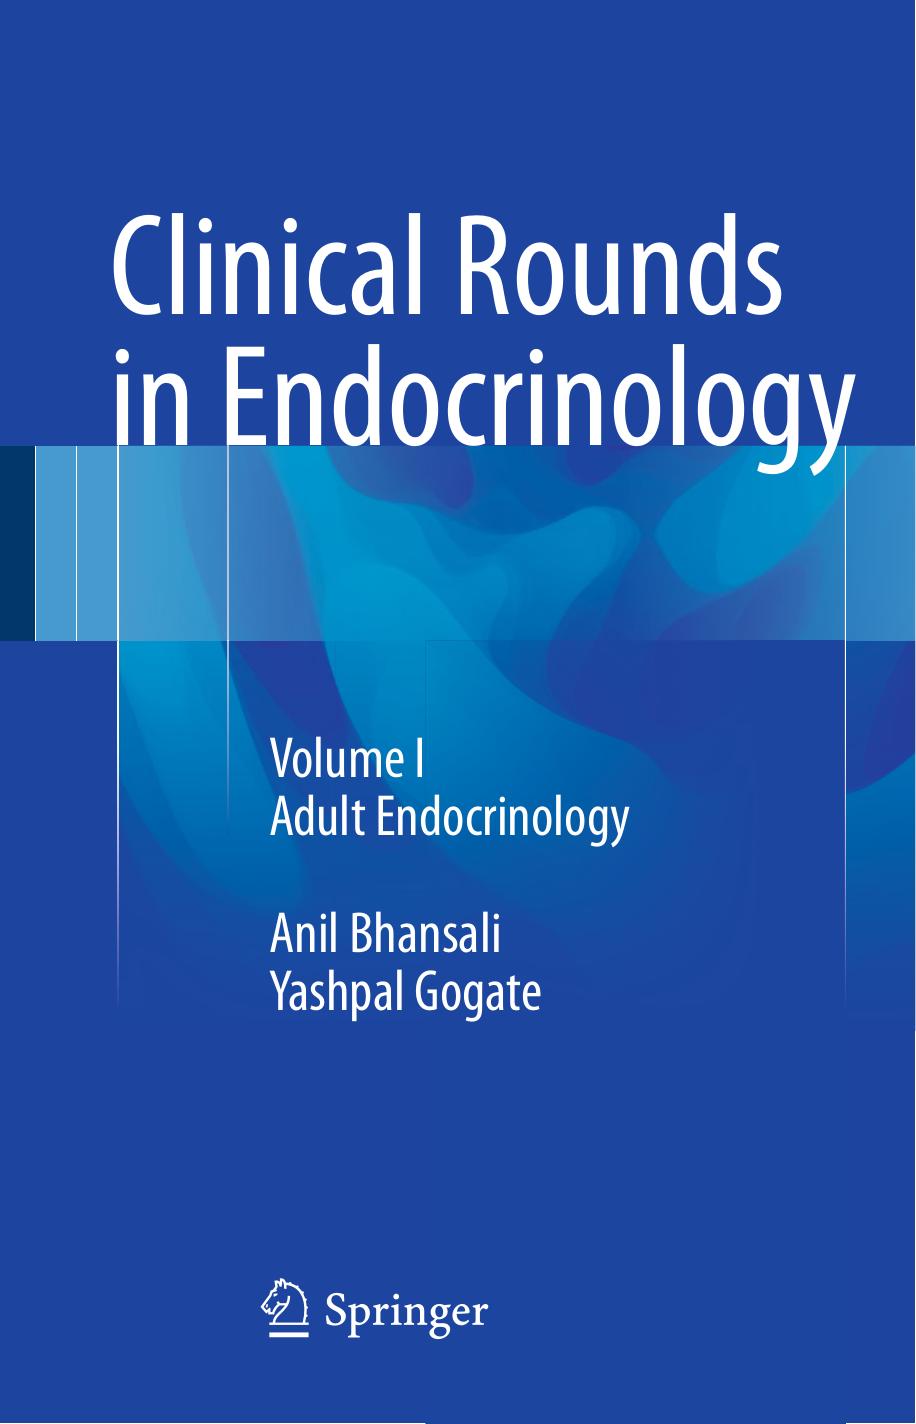 Clinical Rounds in Endocrinology Volume I